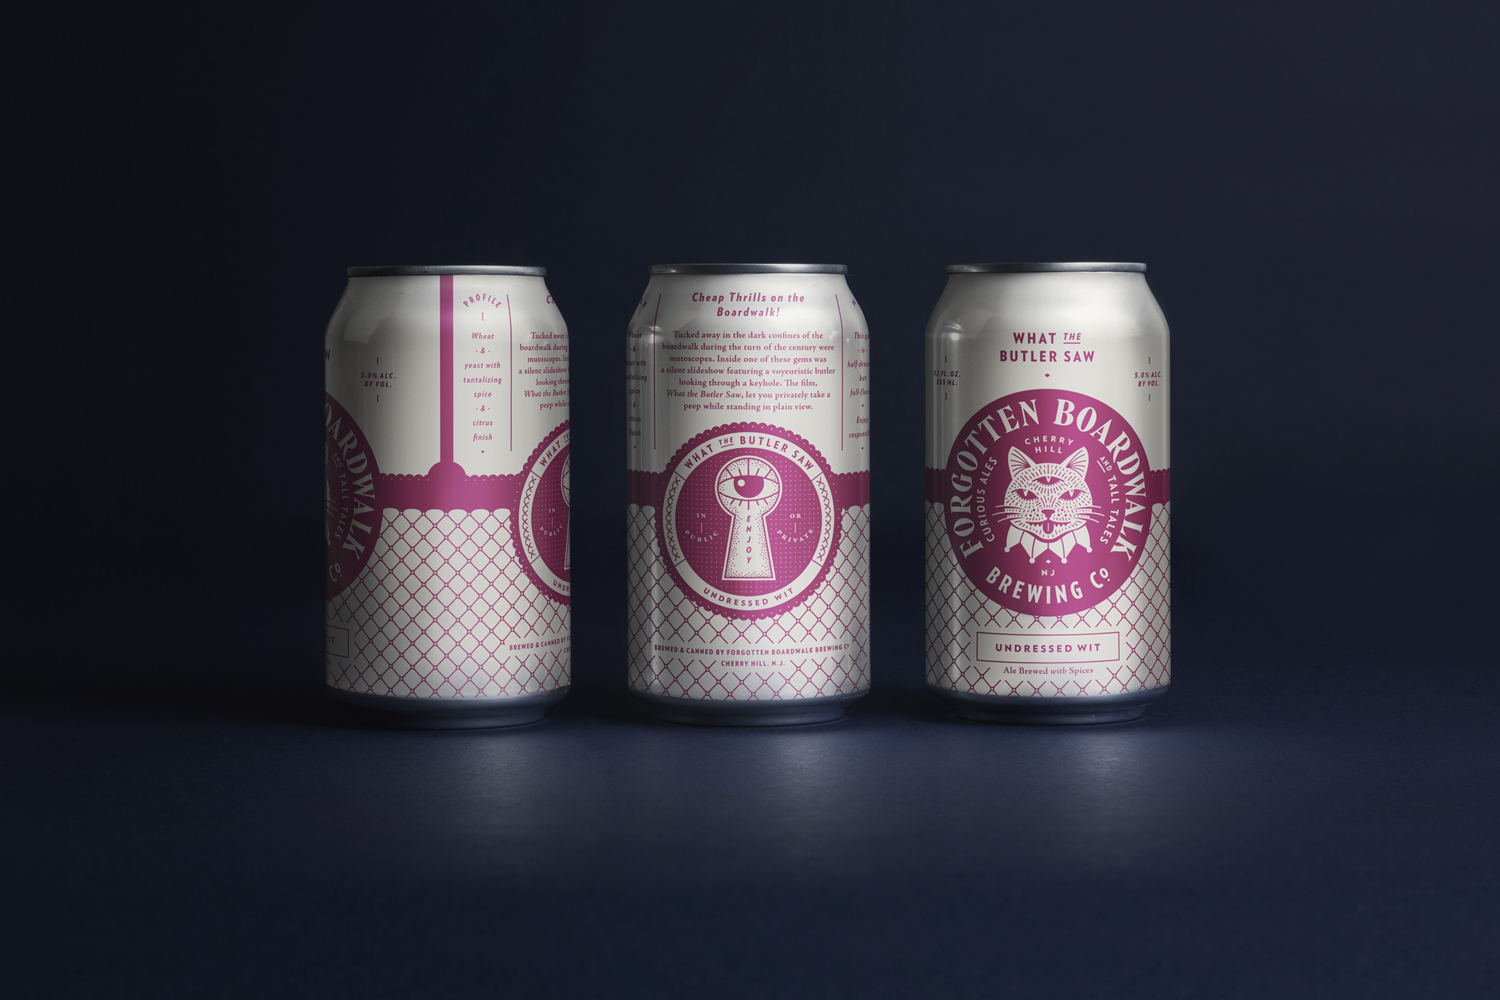 Brand identity and packaging for craft beer brewer Forgotten Boardwalk by Perky Bros